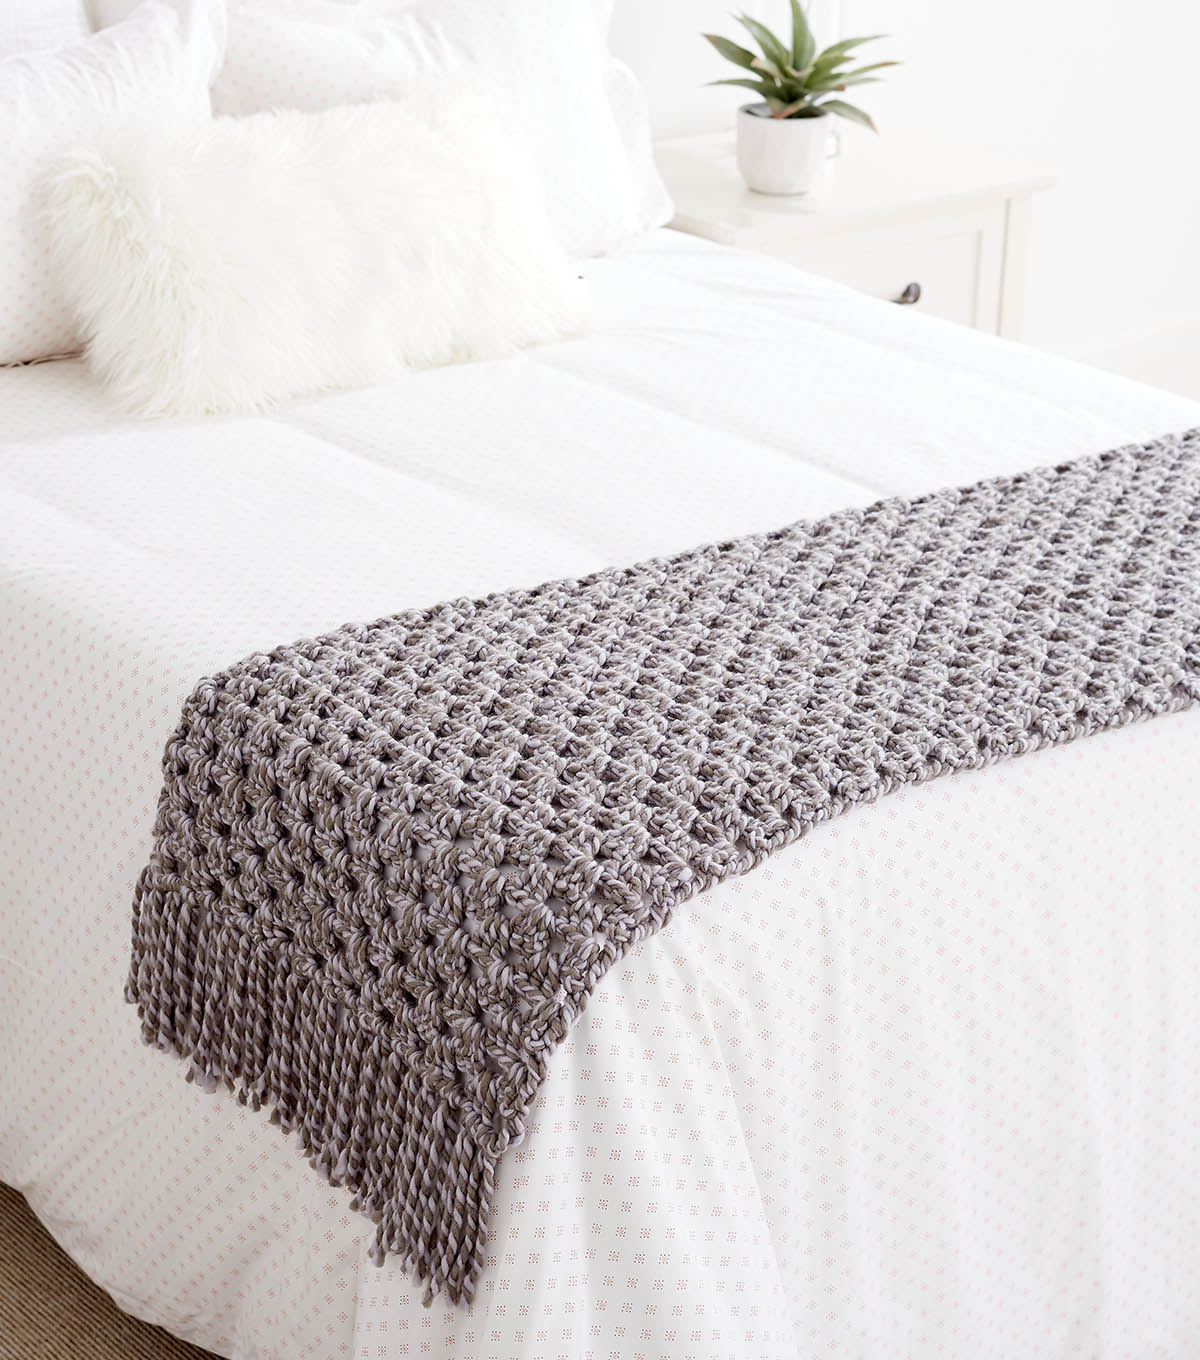 How To Crochet A Bed Scarf | JOANN